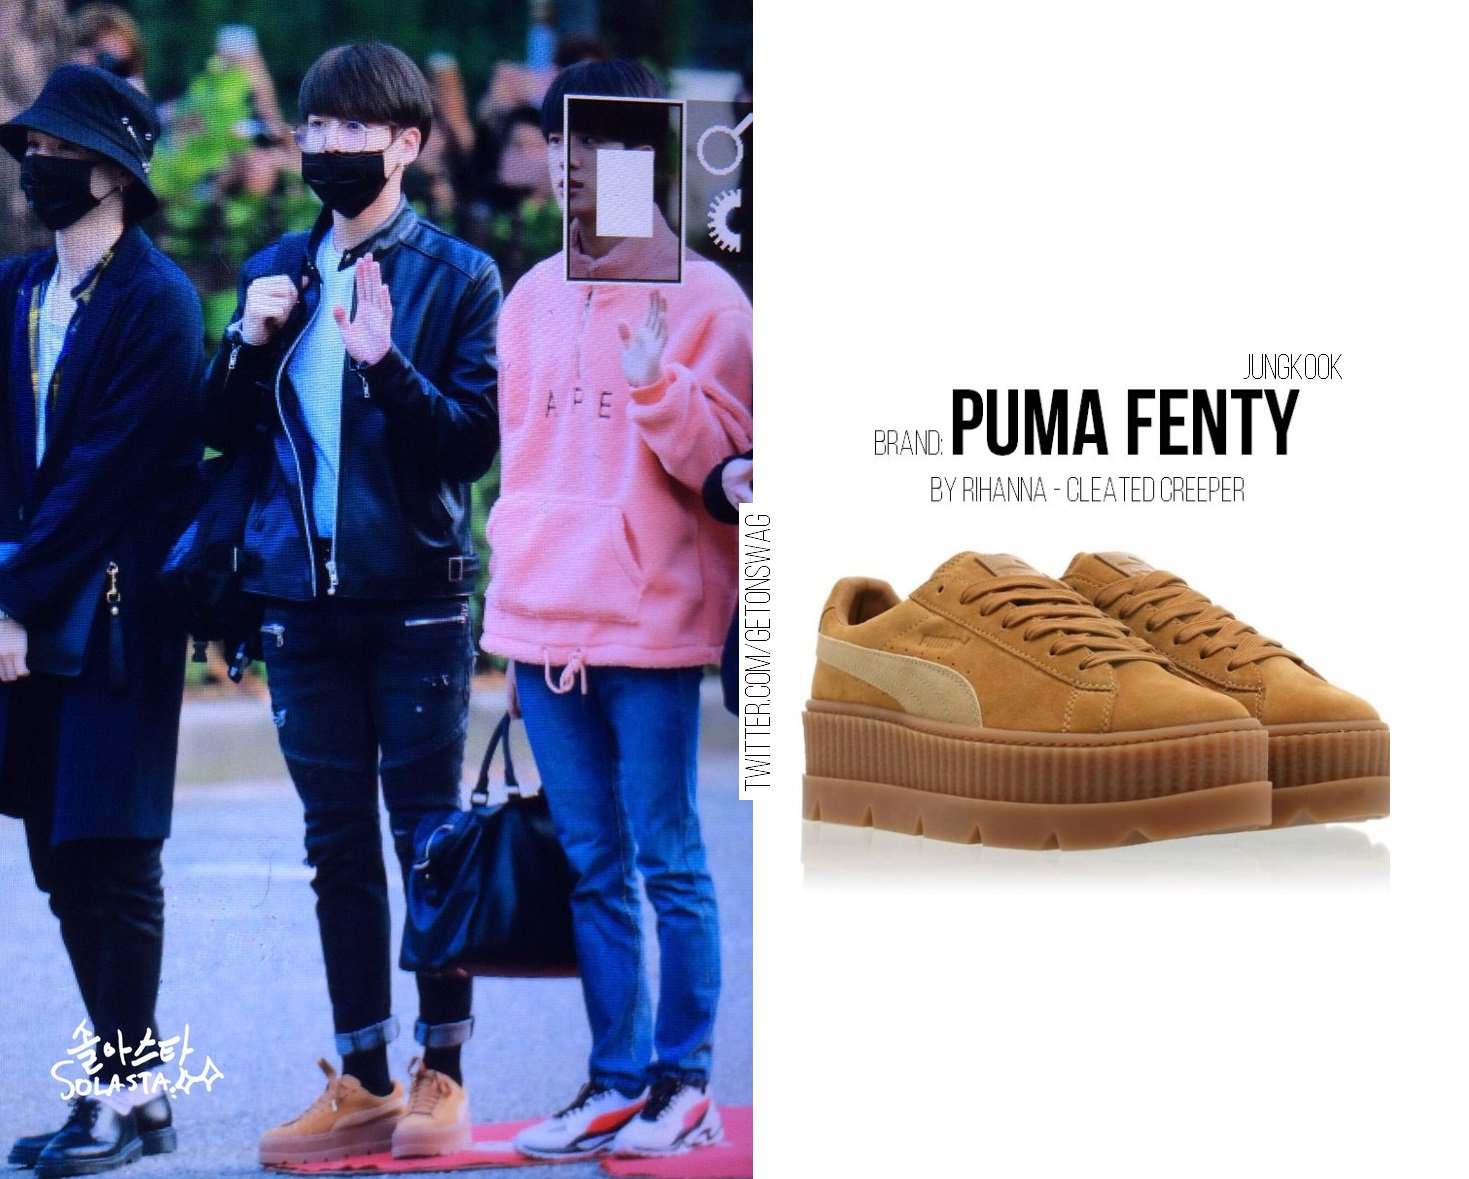 magnifiek eiwit privacy Beyond The Style ✼ Alex ✼ on Twitter: "JUNGKOOK #BTS 170922 #JUNGKOOK #정국  #방탄소년단 PUMA FENTY by RIHANNA Cleated Creepers https://t.co/53OwdYEGdn" / X